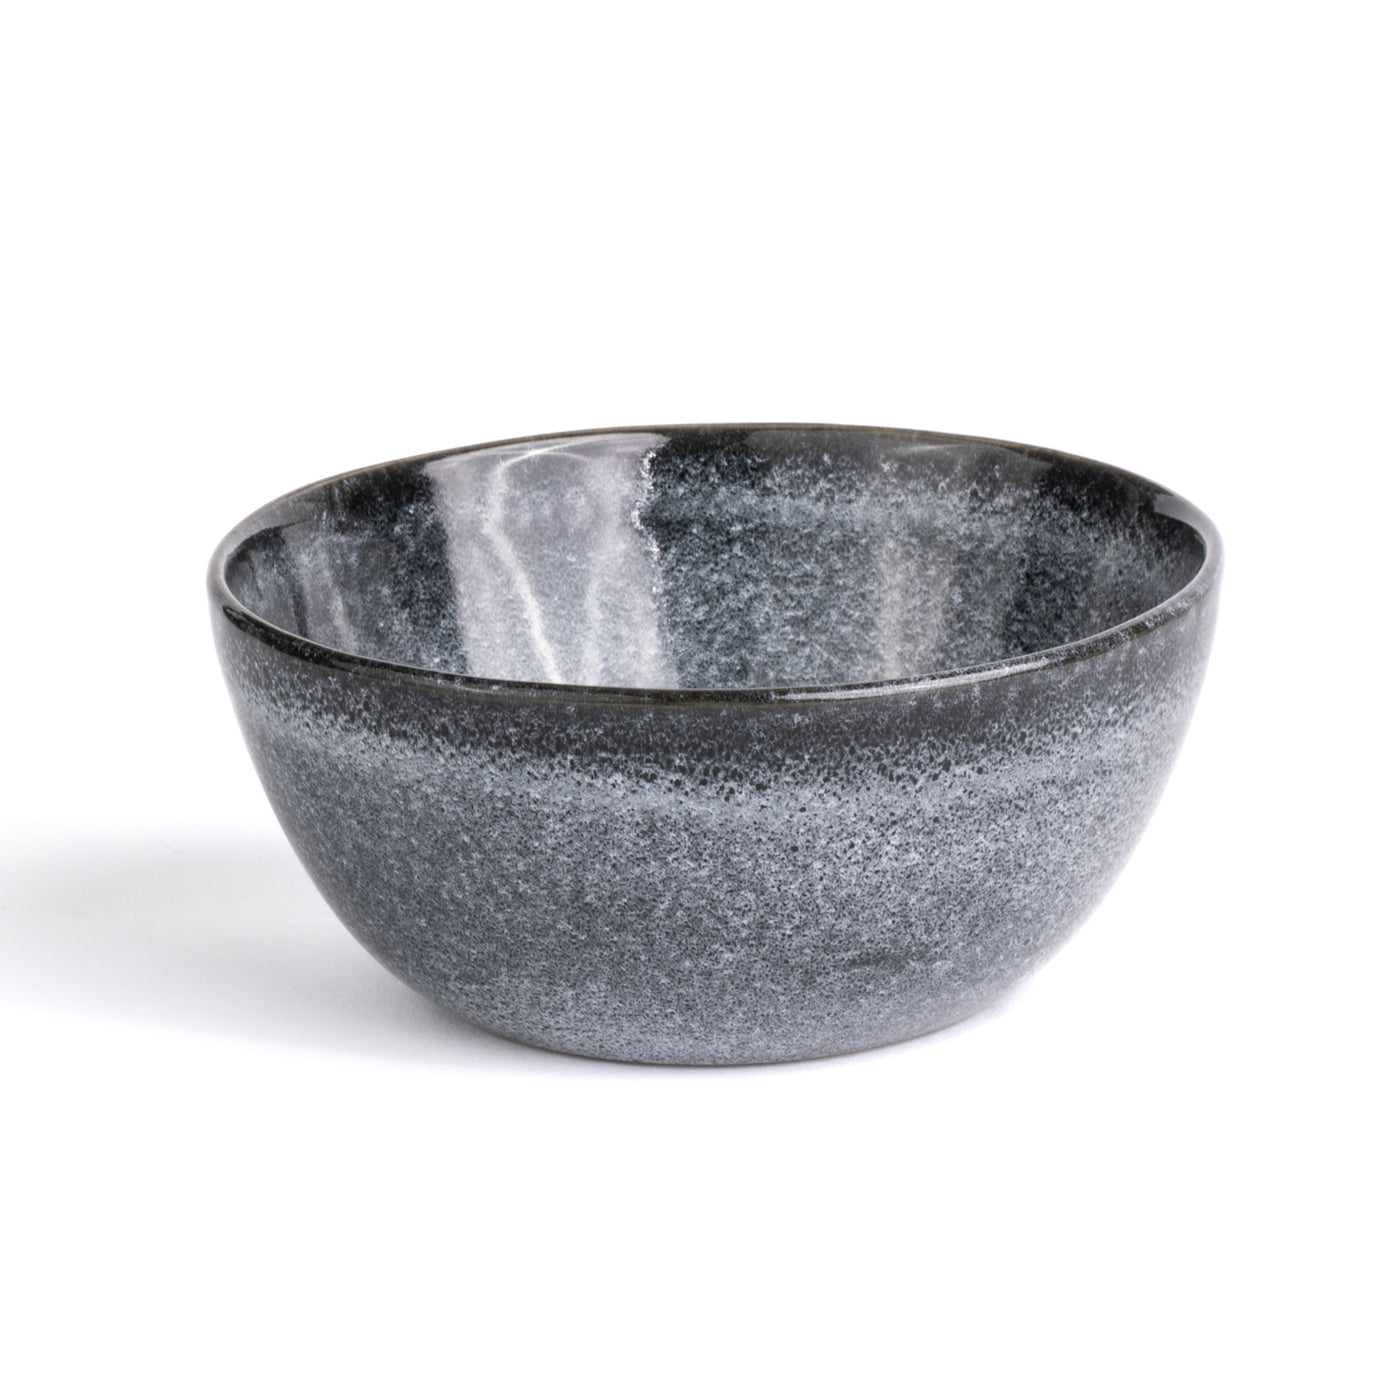 Main dish bowl for poke or curries in recative blue glaze